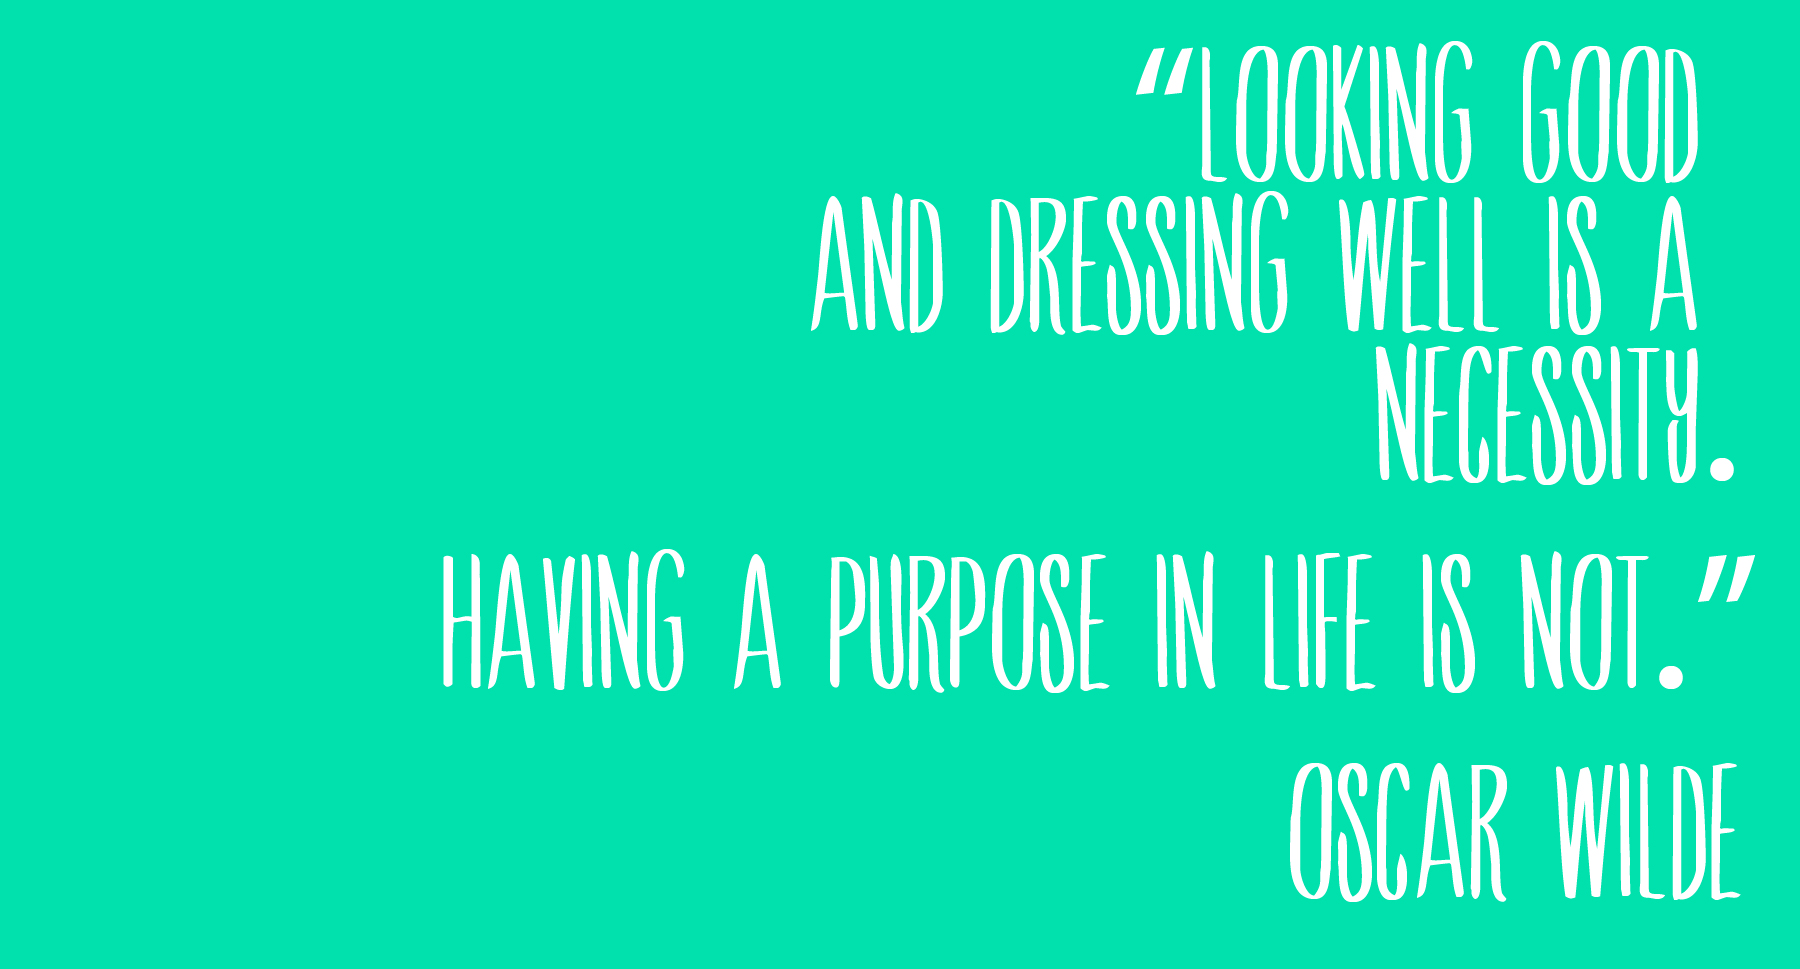 Looking good and dressing well is a necessity. Having a purpose in life is not. Oscar Wilde